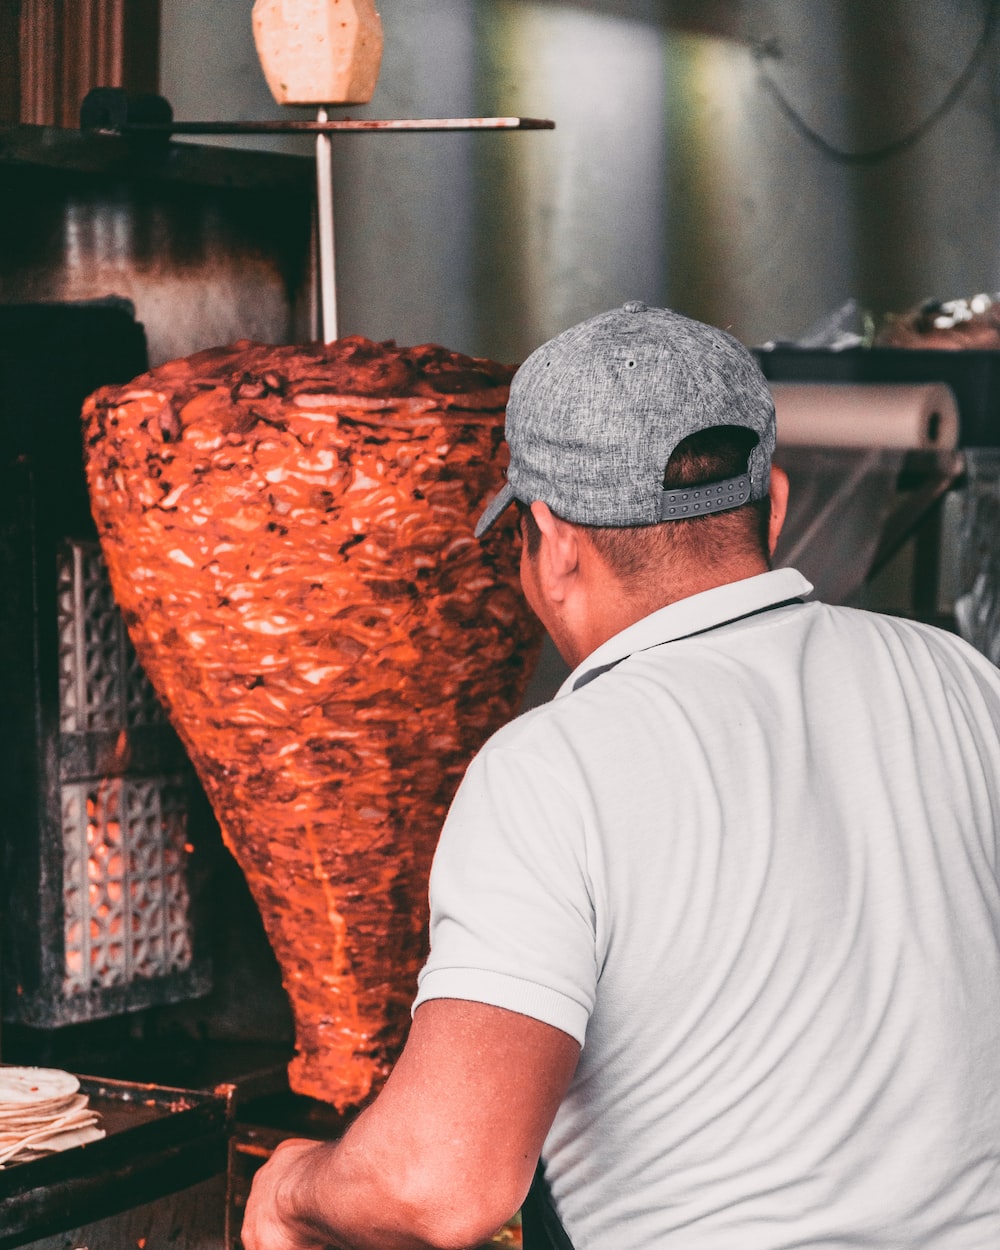 Tacos al pastor pictures download free images on